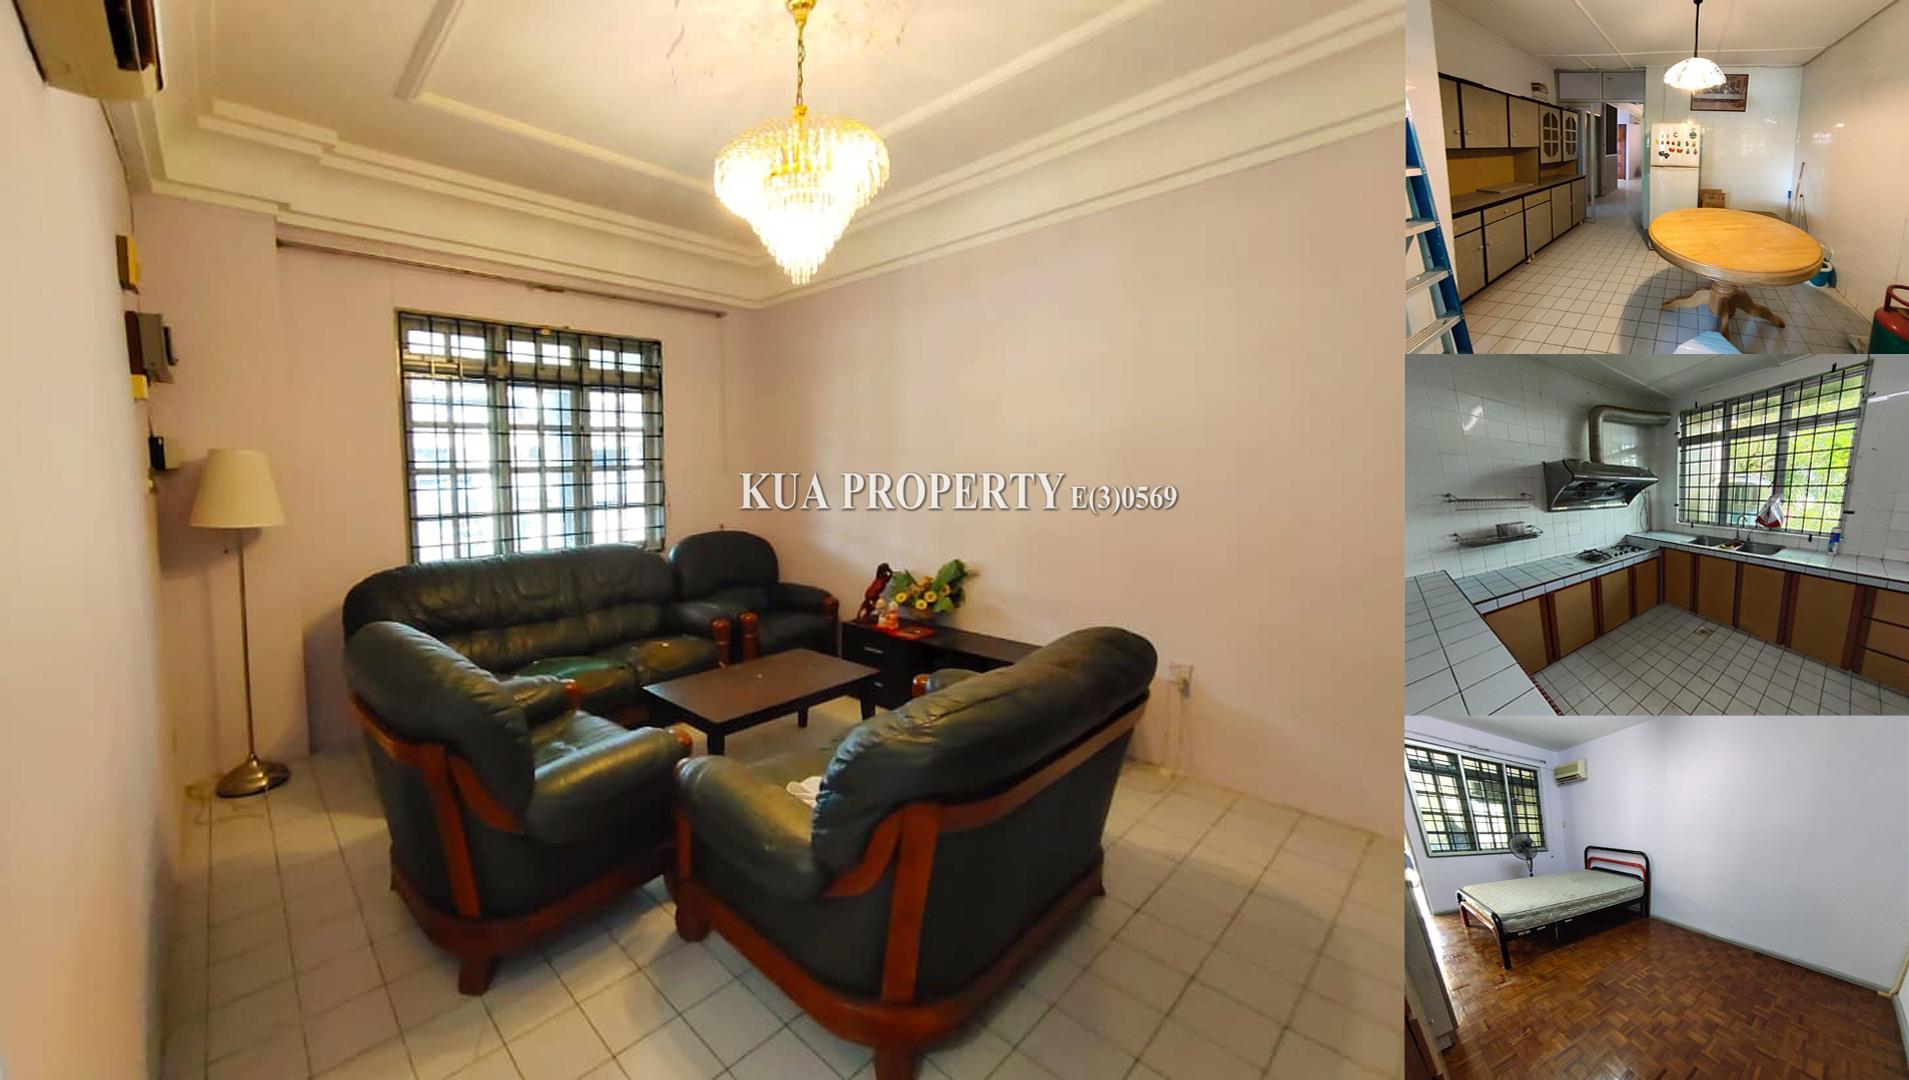 Double Storey Terrace Intermediate House For Rent! at BDC, Kuching